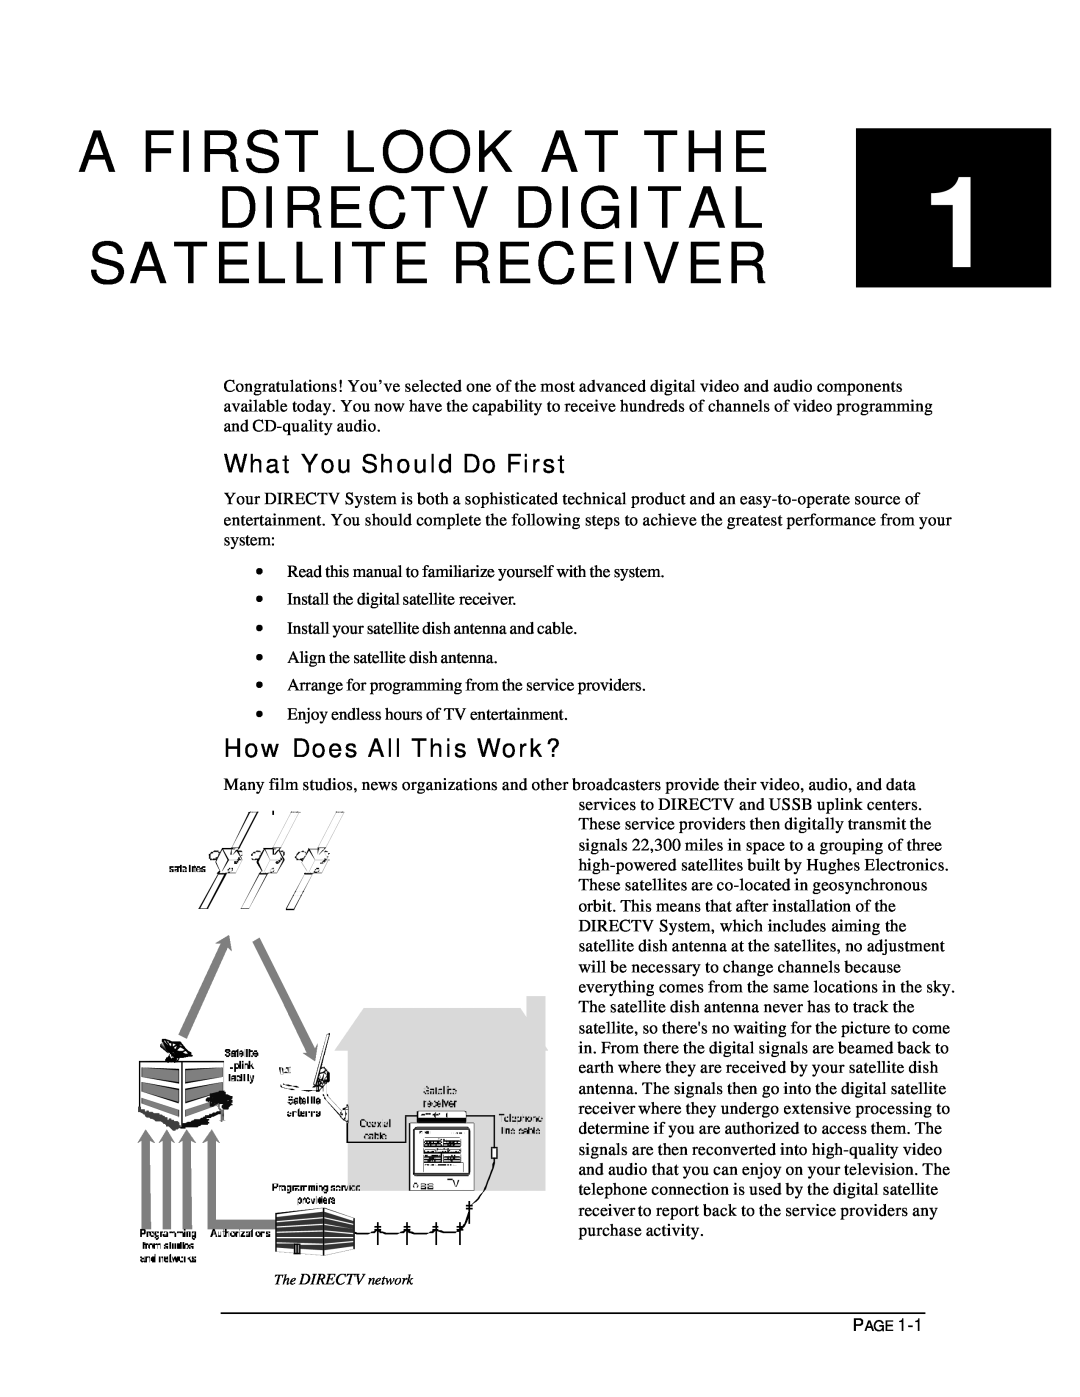 DirecTV HIRD-D11, HIRD-D01 owner manual A First Look At The Directv Digital, Satellite Receiver, What You Should Do First 